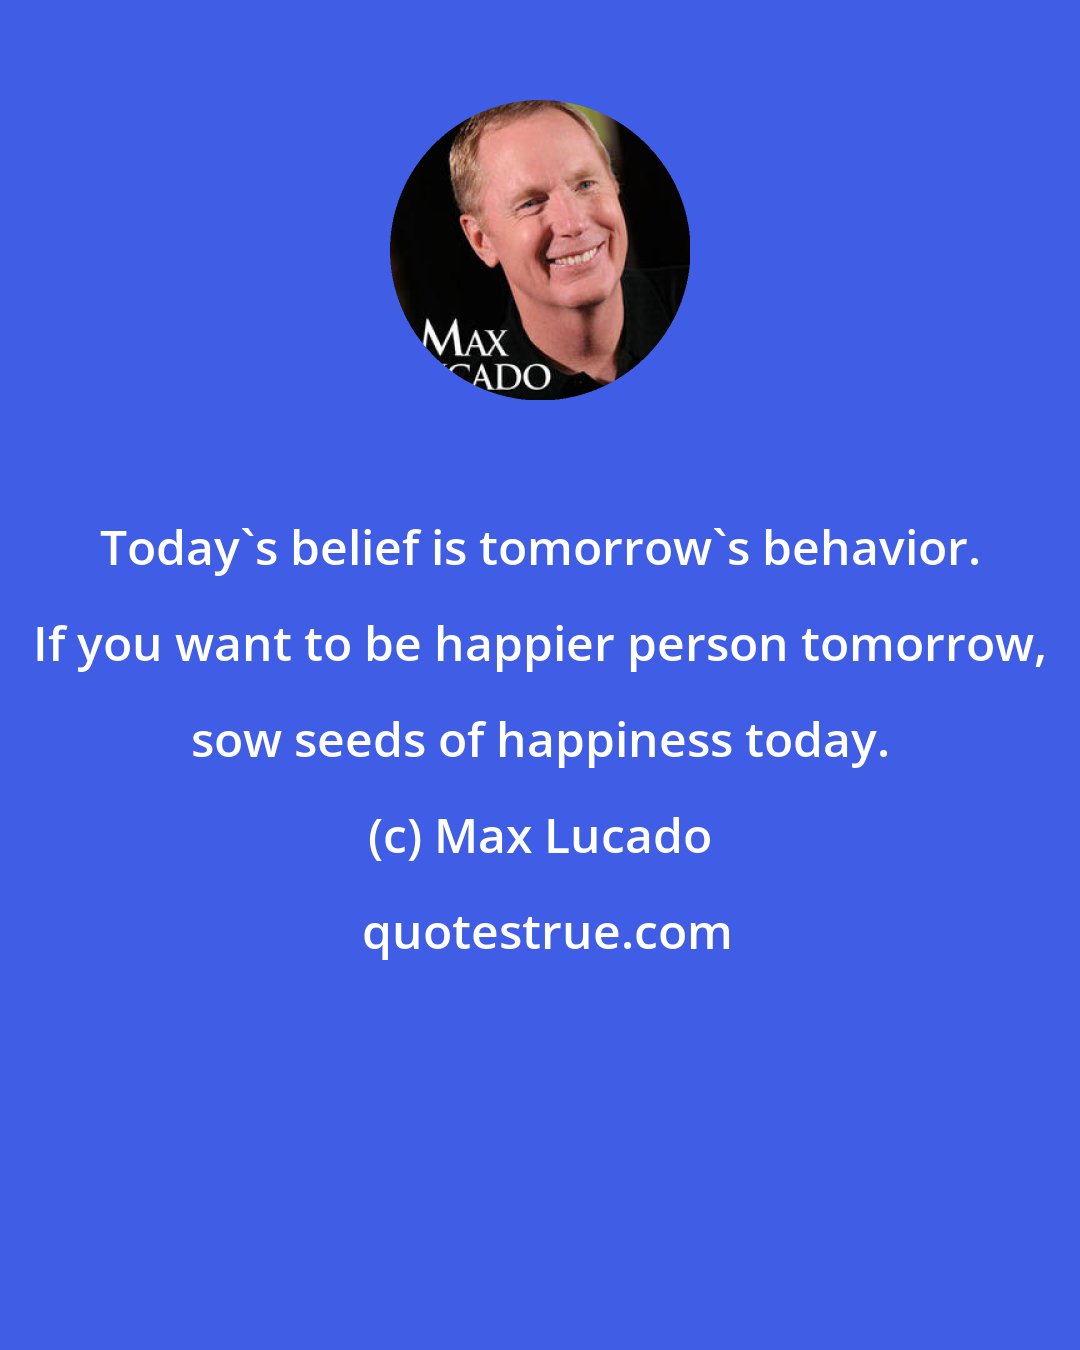 Max Lucado: Today's belief is tomorrow's behavior. If you want to be happier person tomorrow, sow seeds of happiness today.